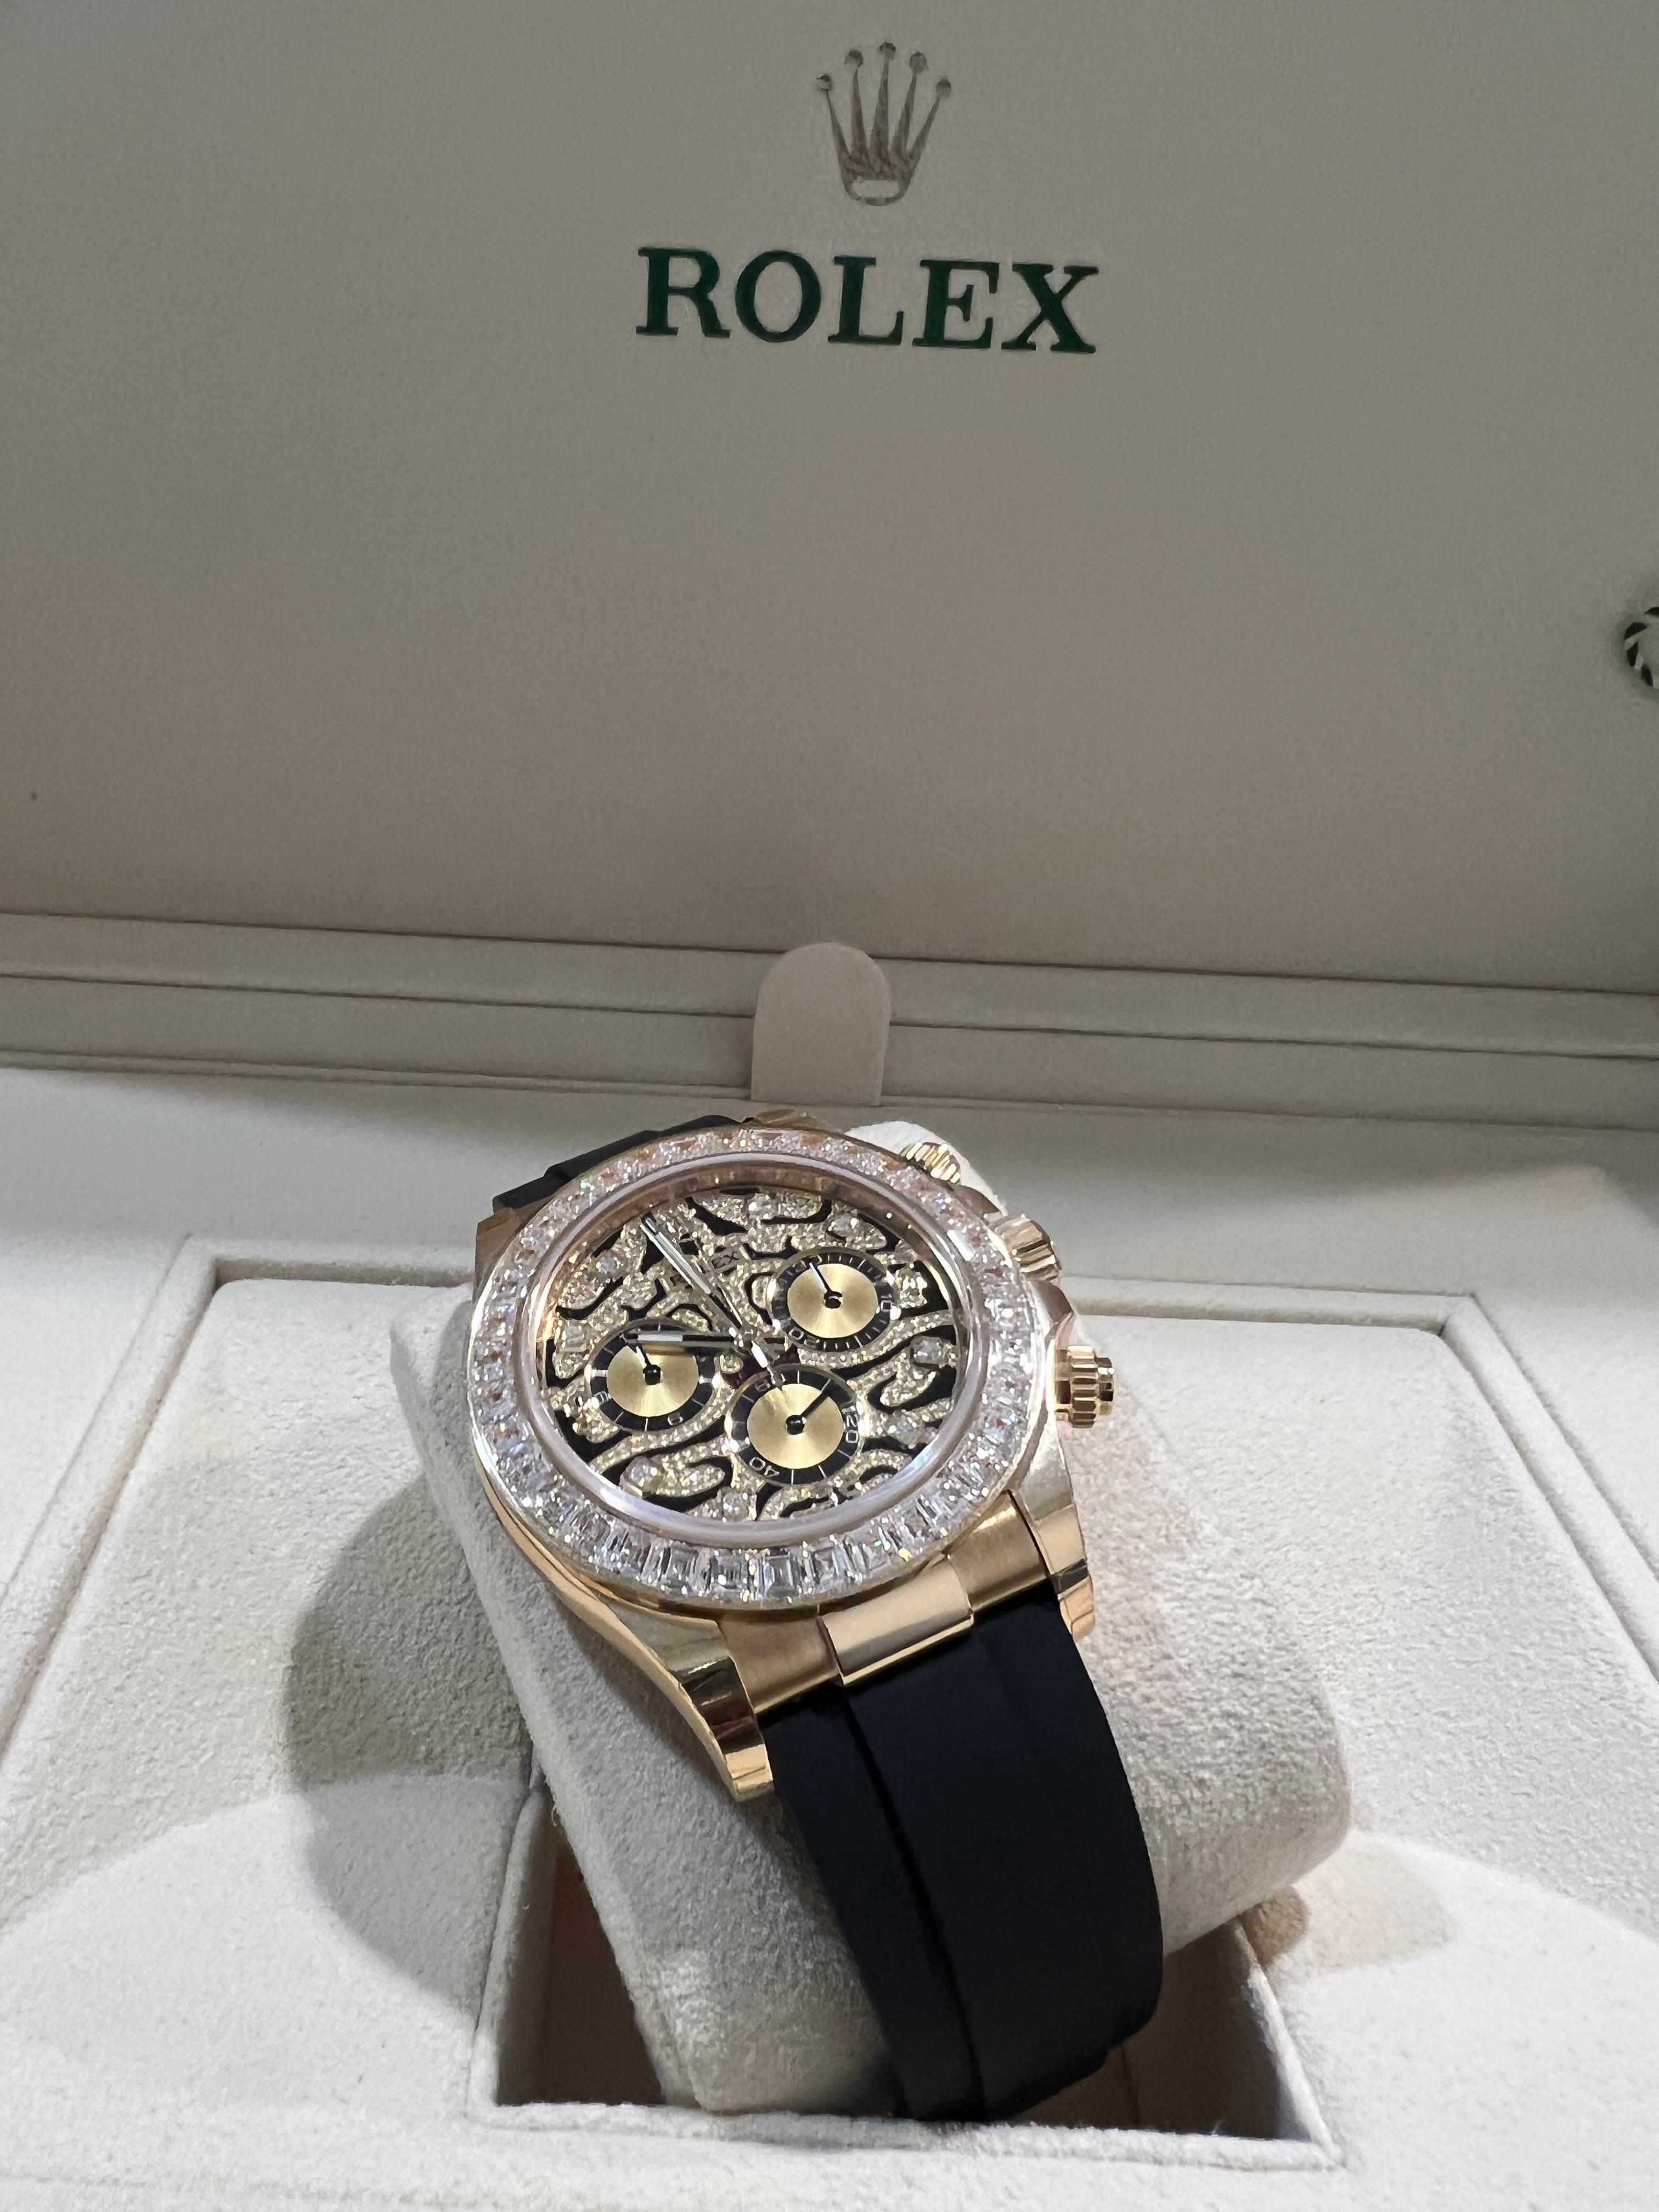 Rolex surprised the masses at Baselworld 2019 with this beautifully bedazzled Cosmograph Daytona 116588TBR. Nicknamed “Eye of the Tiger,” the Rolex Cosmograph Daytona 116588TBR has a tiger-print, diamond-laced dial, a gem-set yellow-gold bezel with